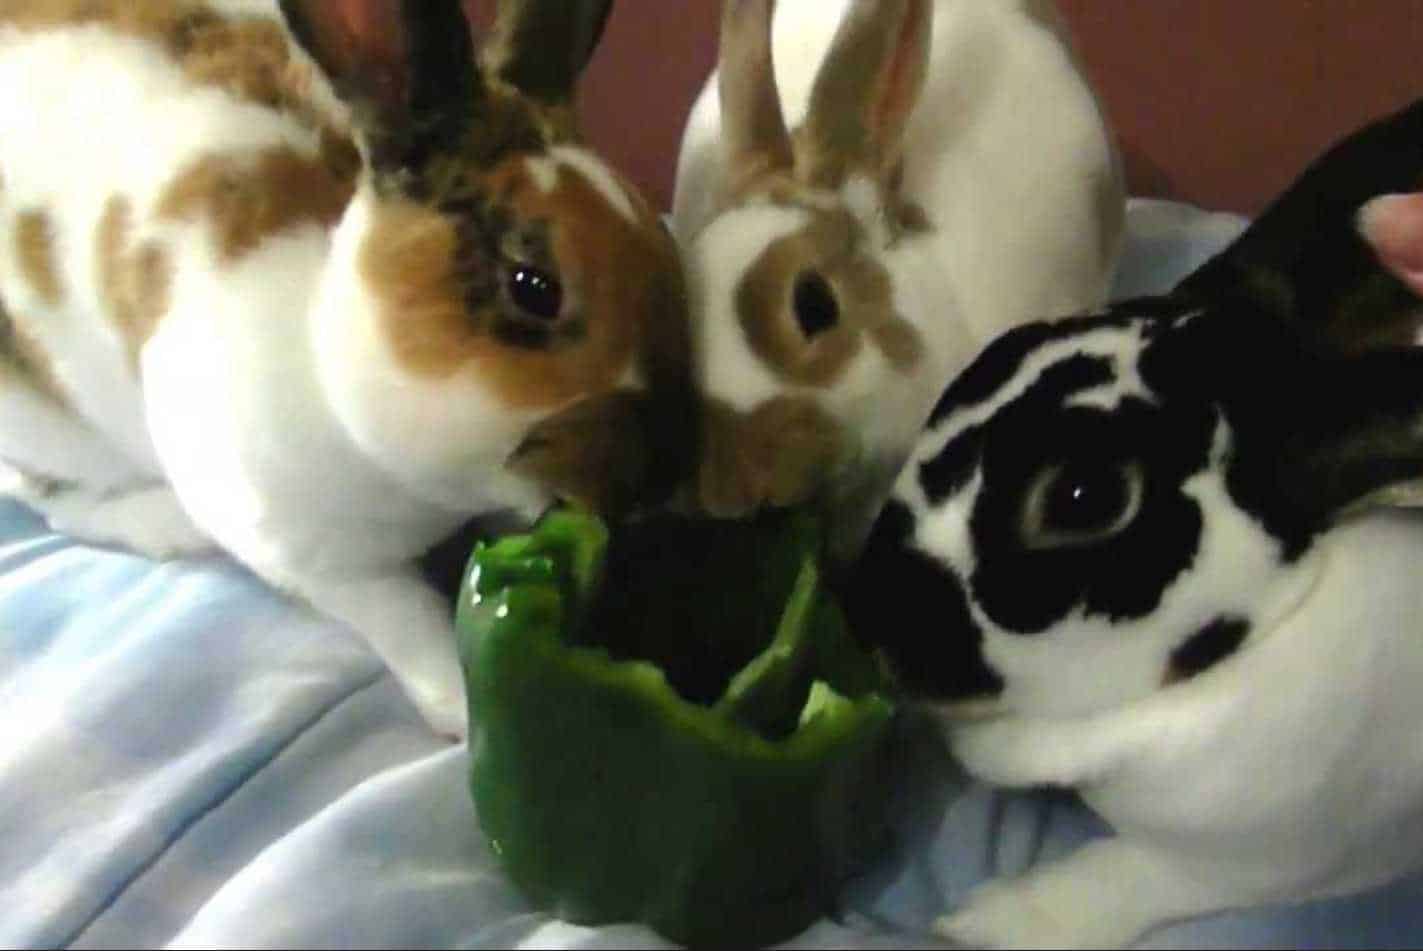 can rabbits eat red peppers